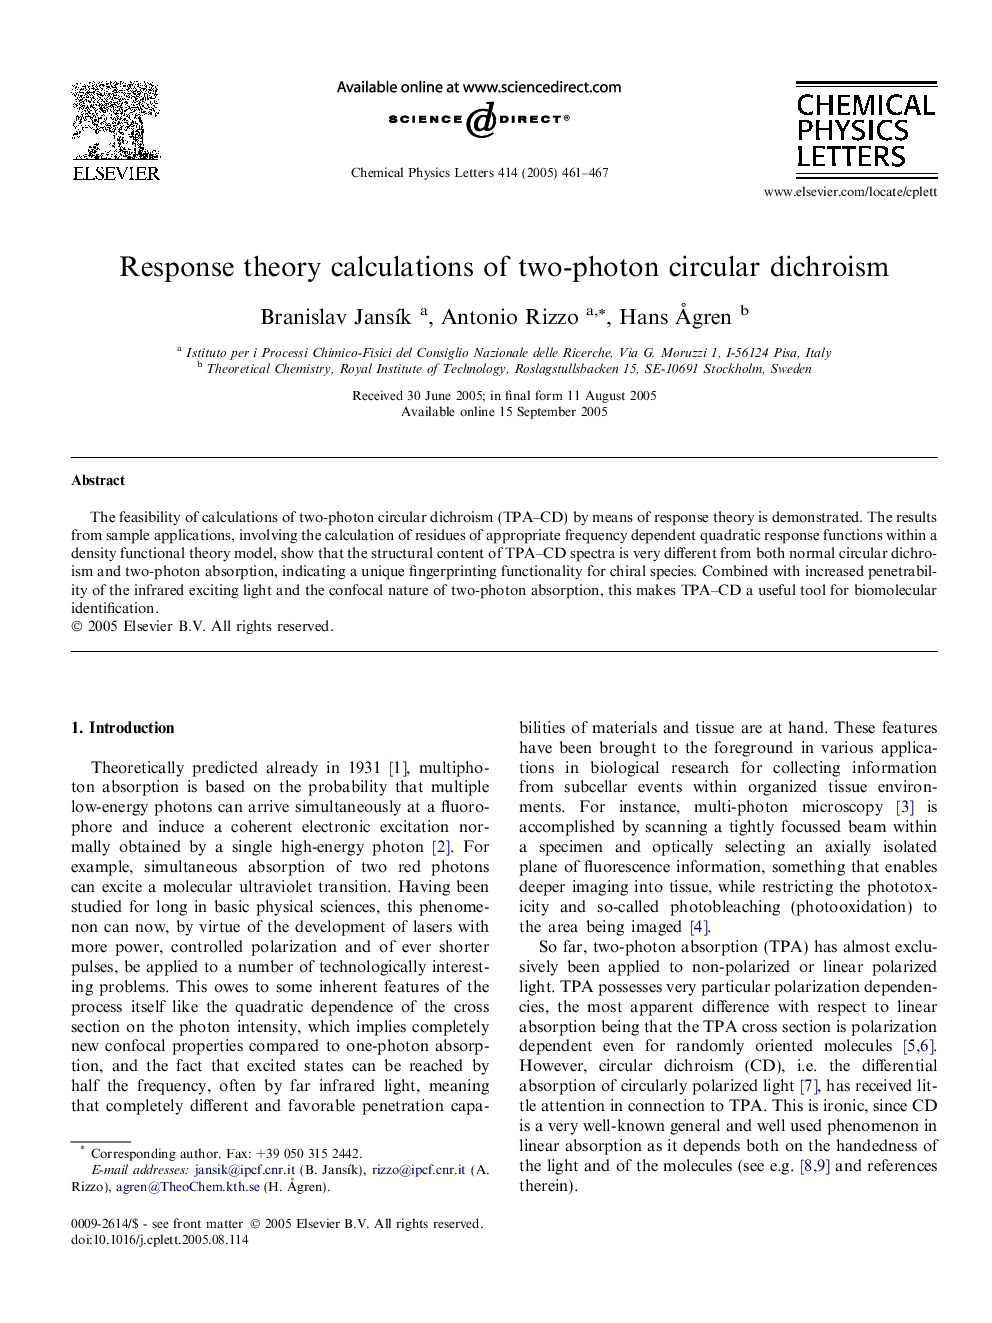 Response theory calculations of two-photon circular dichroism